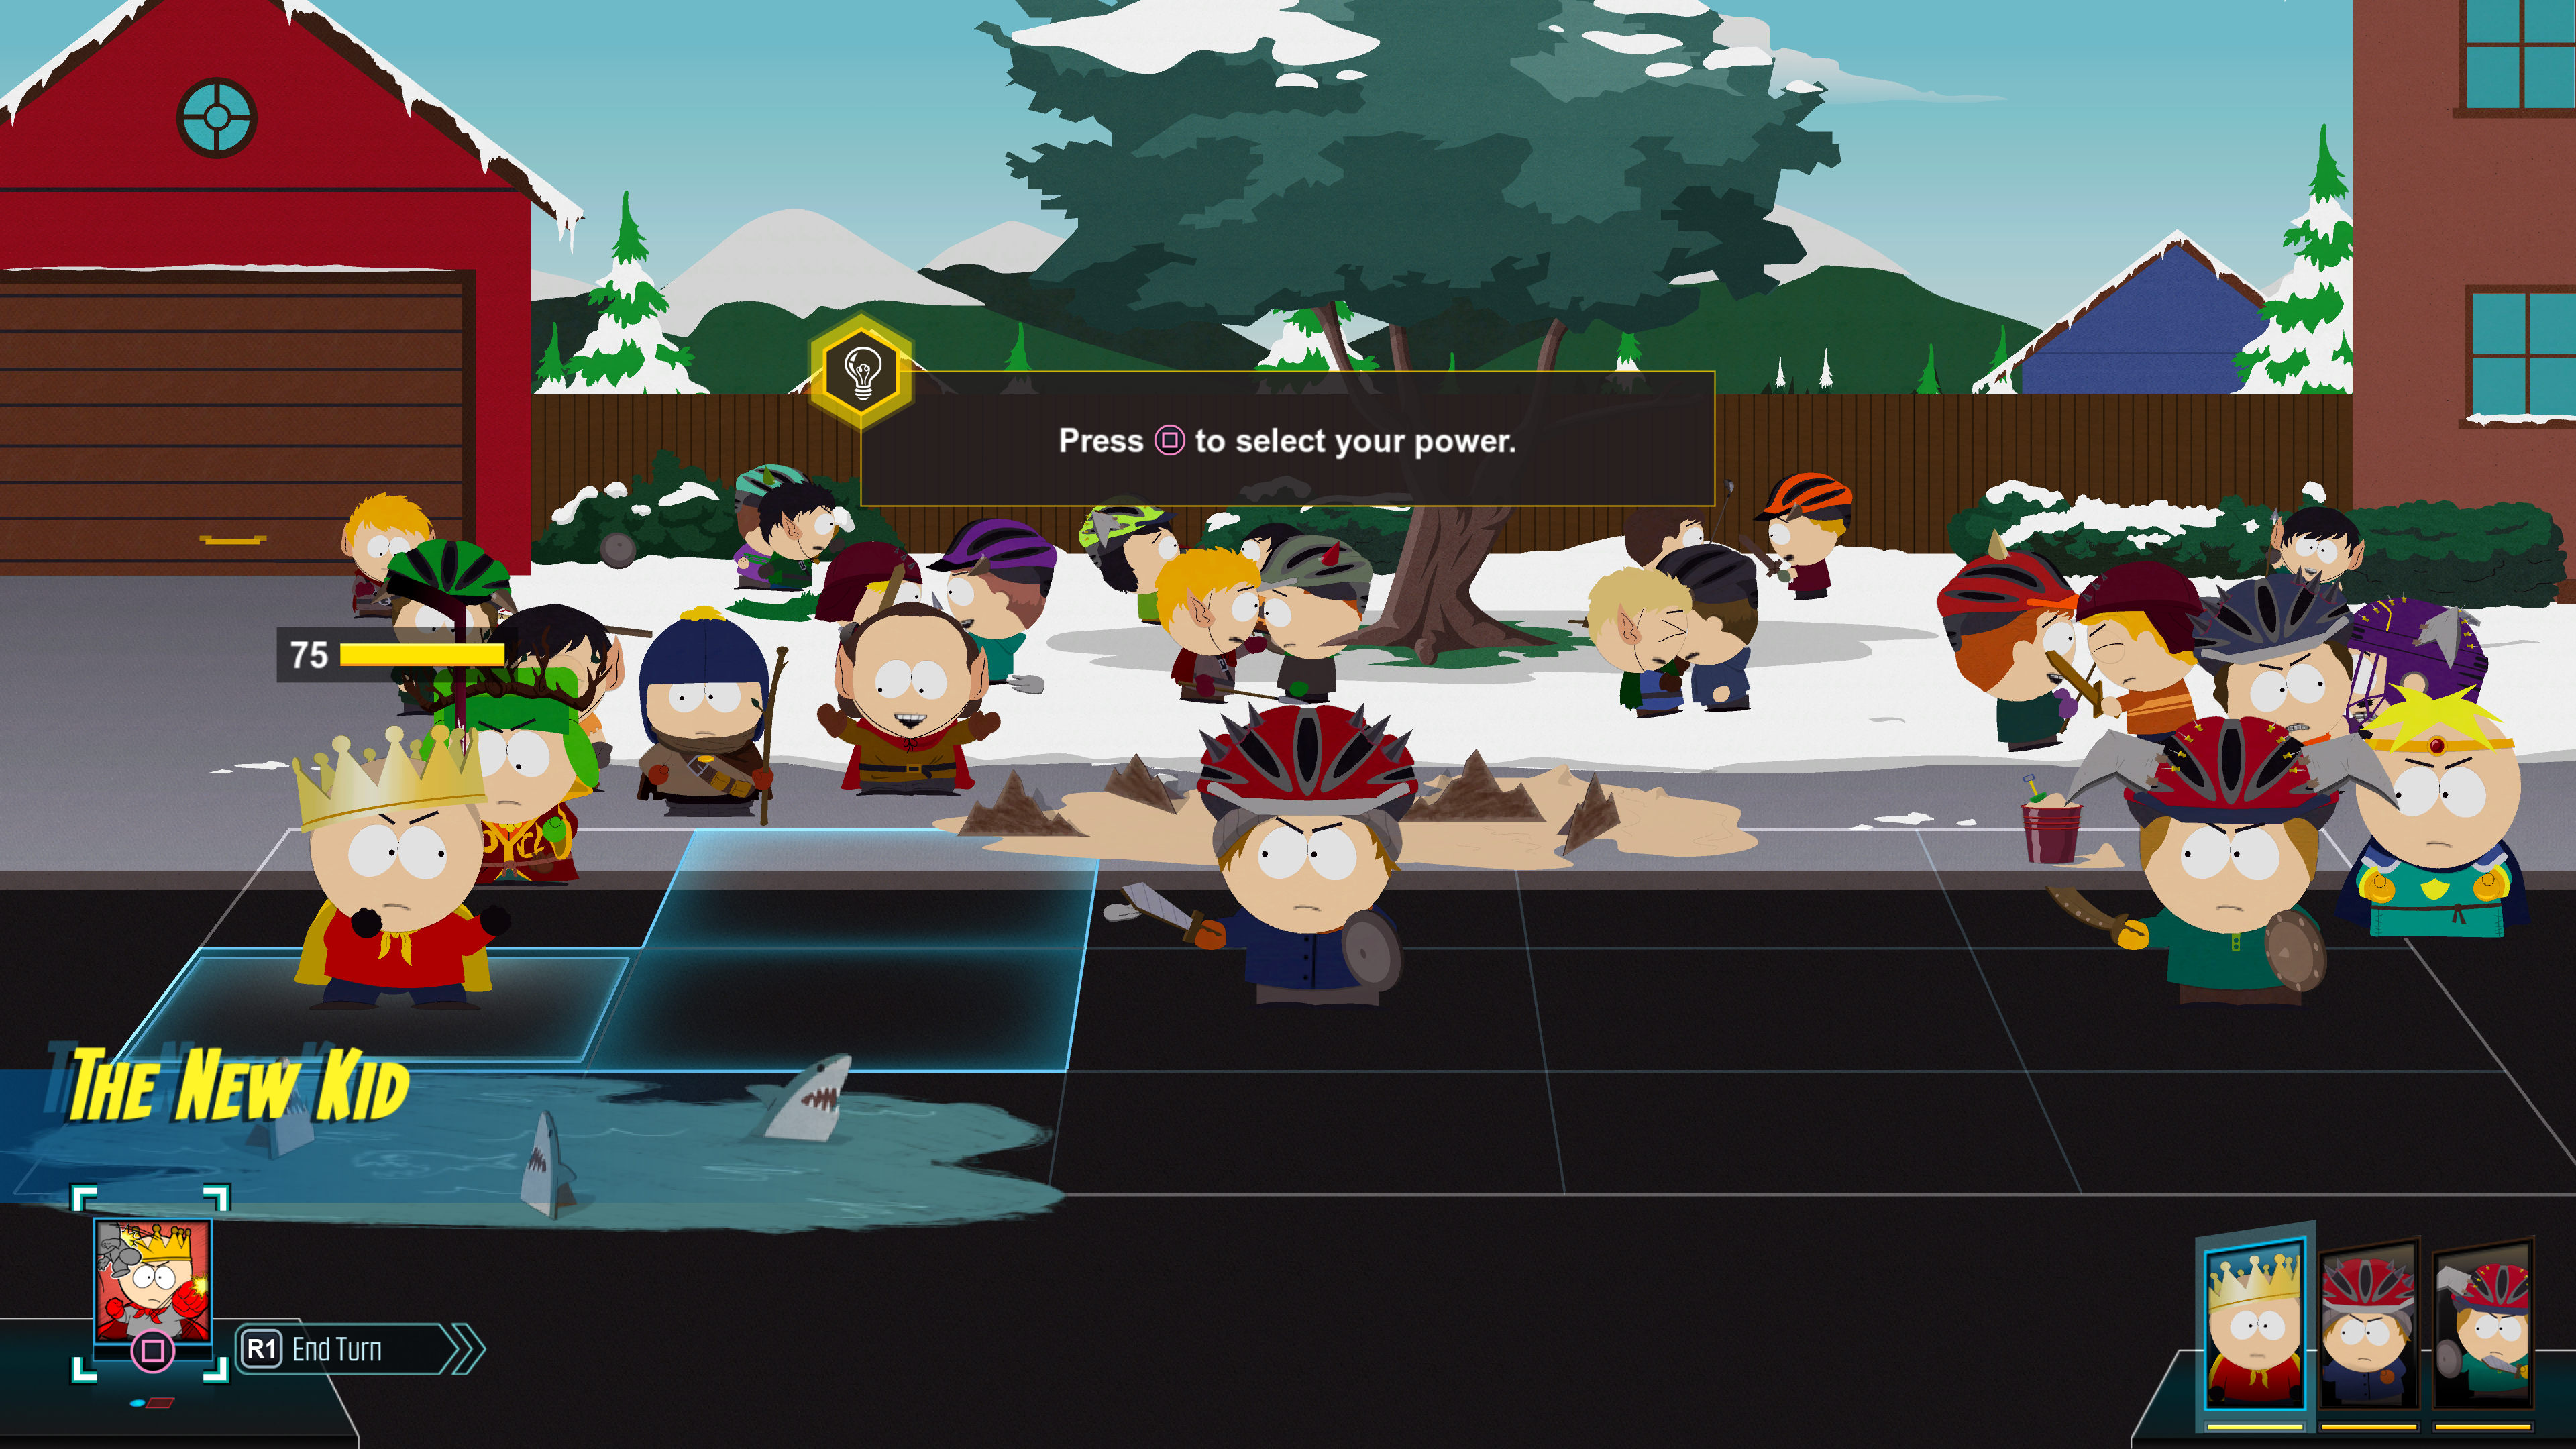 south park the fractured but whole identifying as other gender